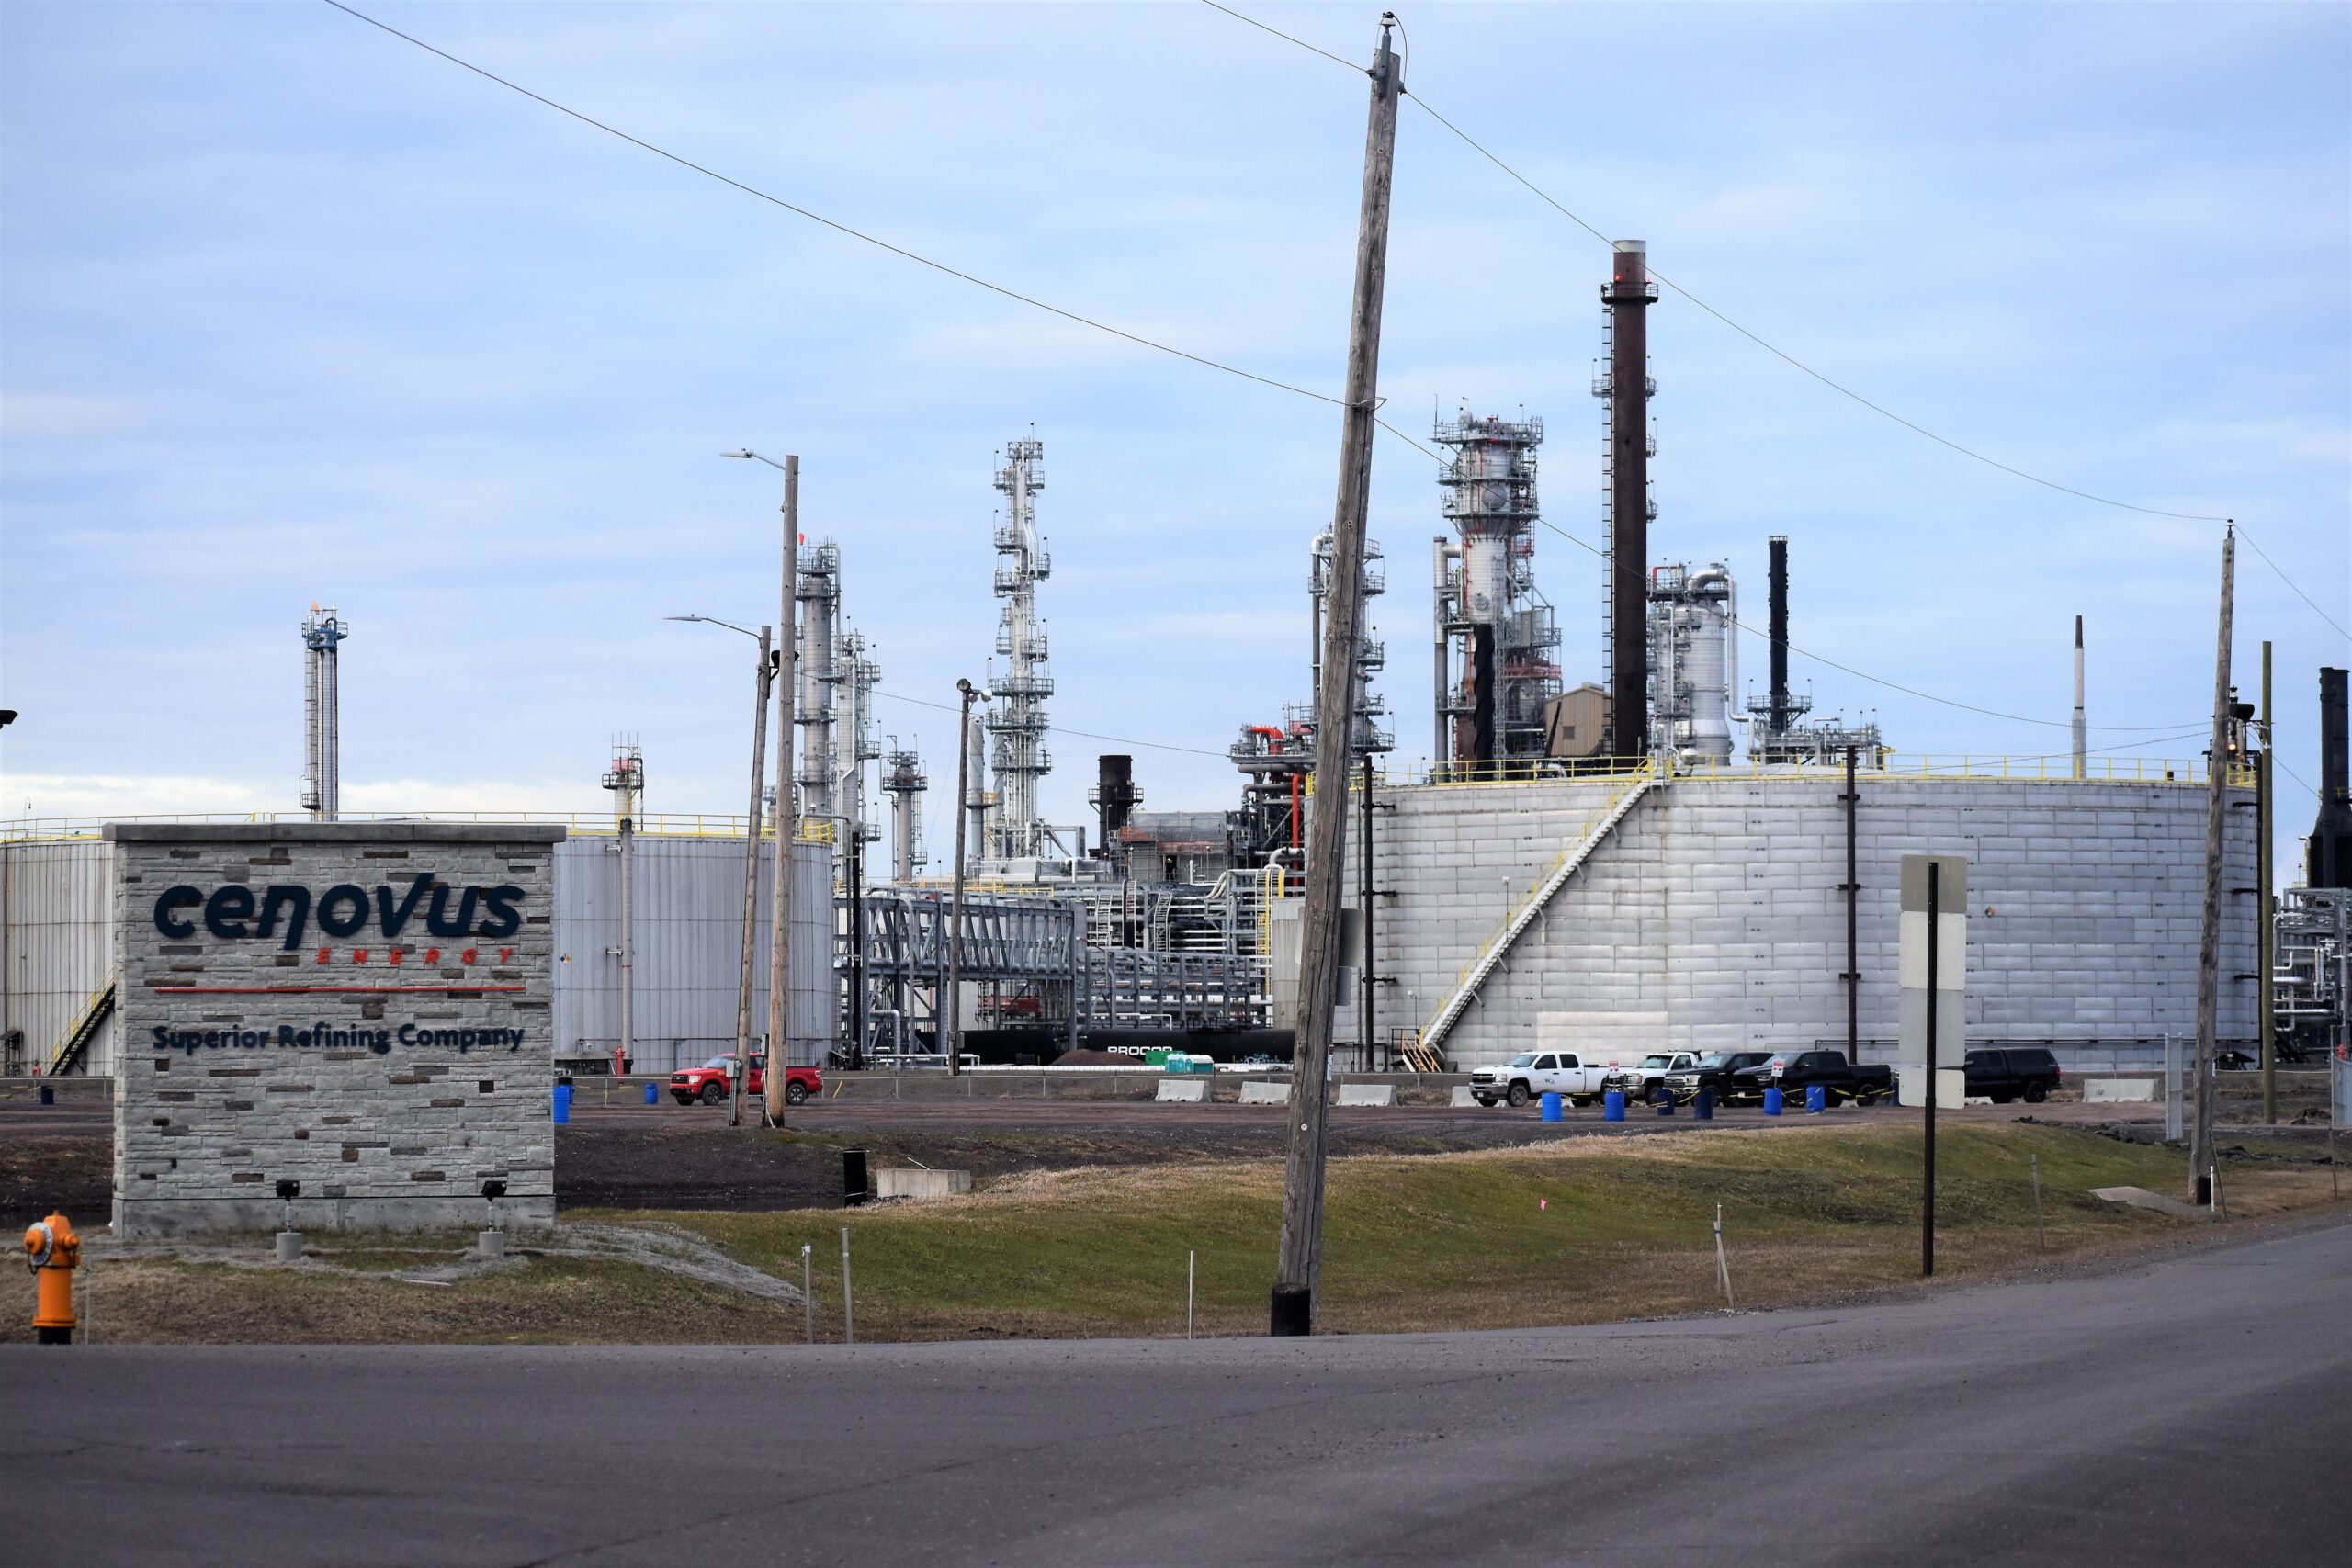 Leak of fuel oil vapor at Wisconsin’s only oil refinery marks second incident this week